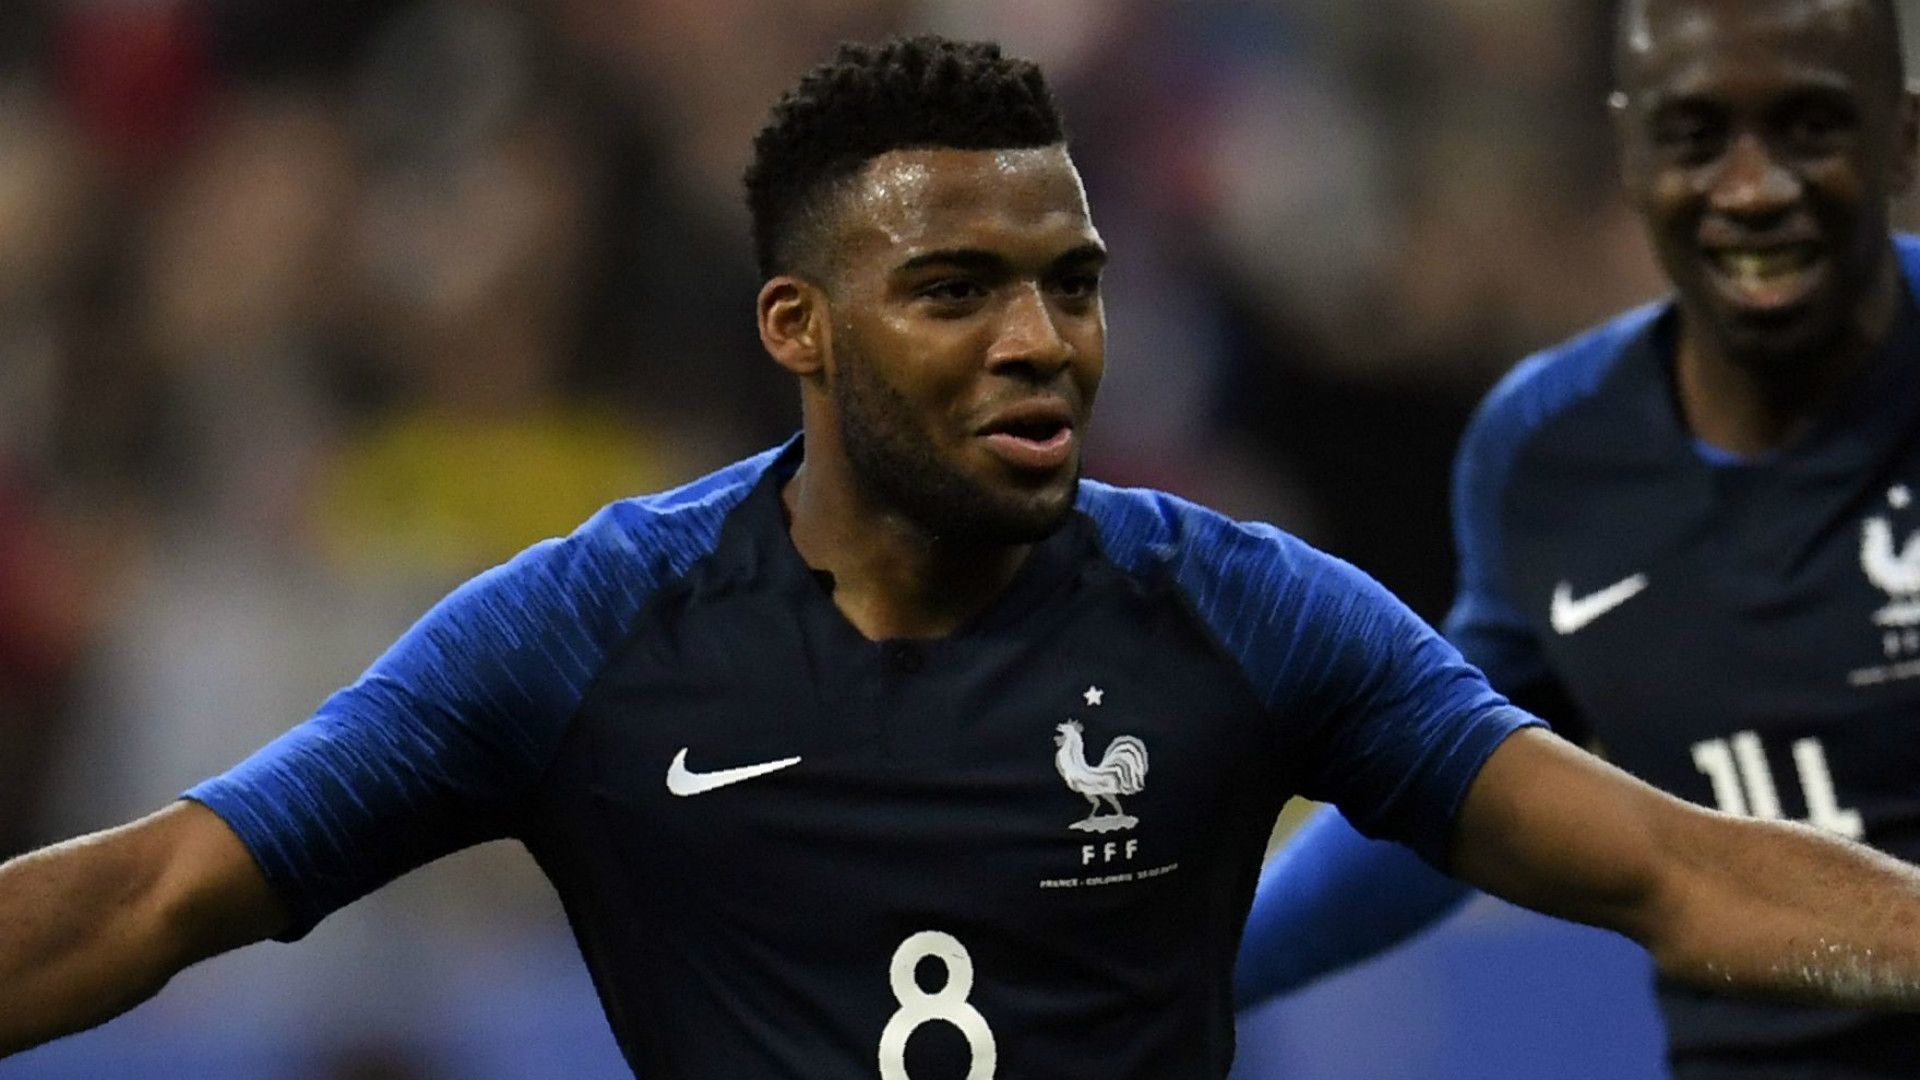 World Cup 2018: Lemar vows to play anywhere for France as he tips Les Bleus to go far in Russia